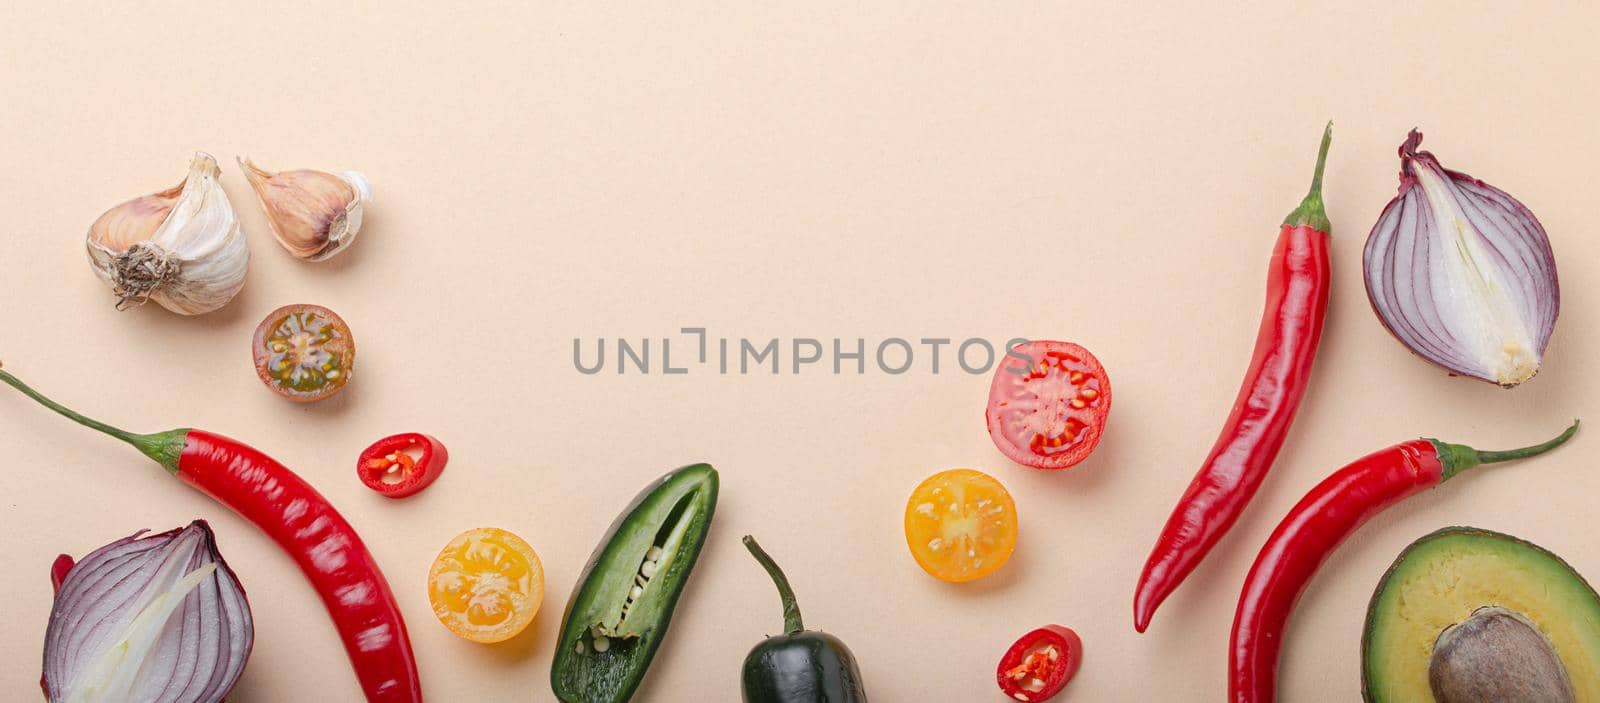 Creative cooking healthy organic food concept background made of colourful fruit and vegetables on beige background flat lay: tomatoes, peppers, avocado, onion, garlic top view with space for text.